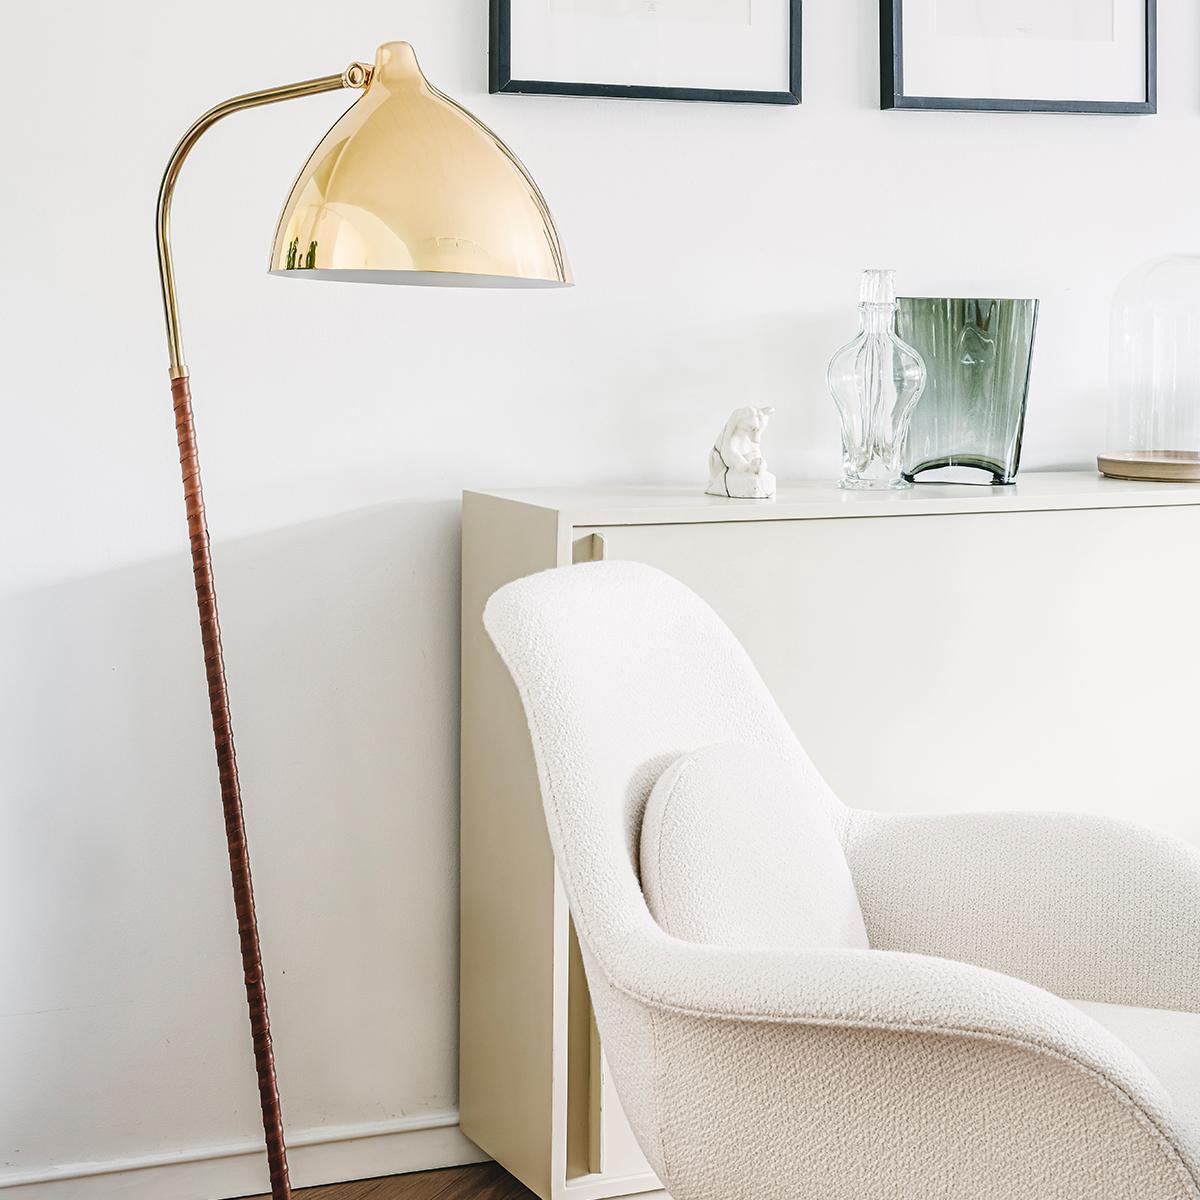 Modern Brass & Leather 'Lisa' Lamp by Lisa Johansson-Pape - Ships from Stock For Sale